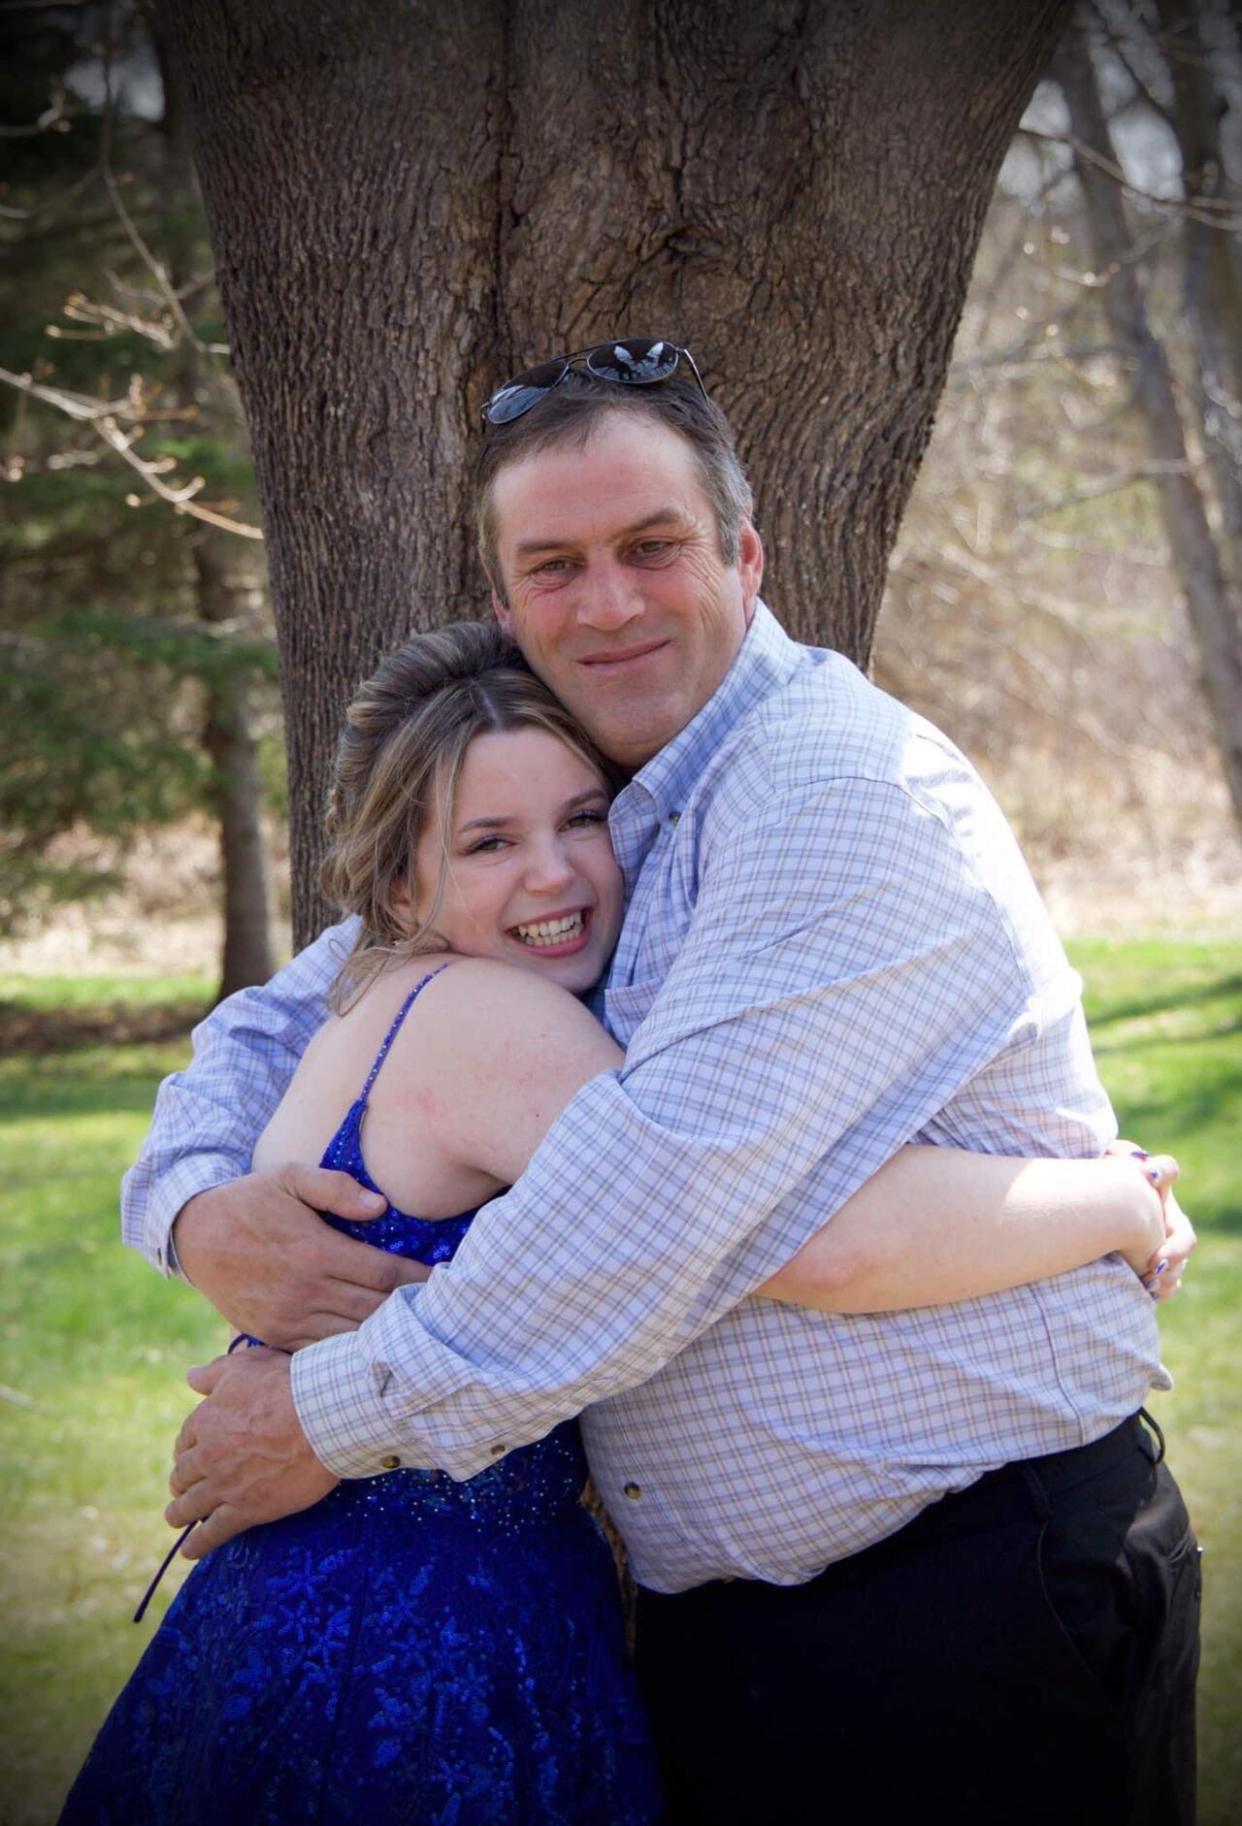 Brian Lush is seen here with his daughter, Chloe White. Ontario police said Monday that his body had been found, and confirmed Tuesday his body had been inside his truck's trailer, where he was last seen. (Submitted by Chloe White - image credit)